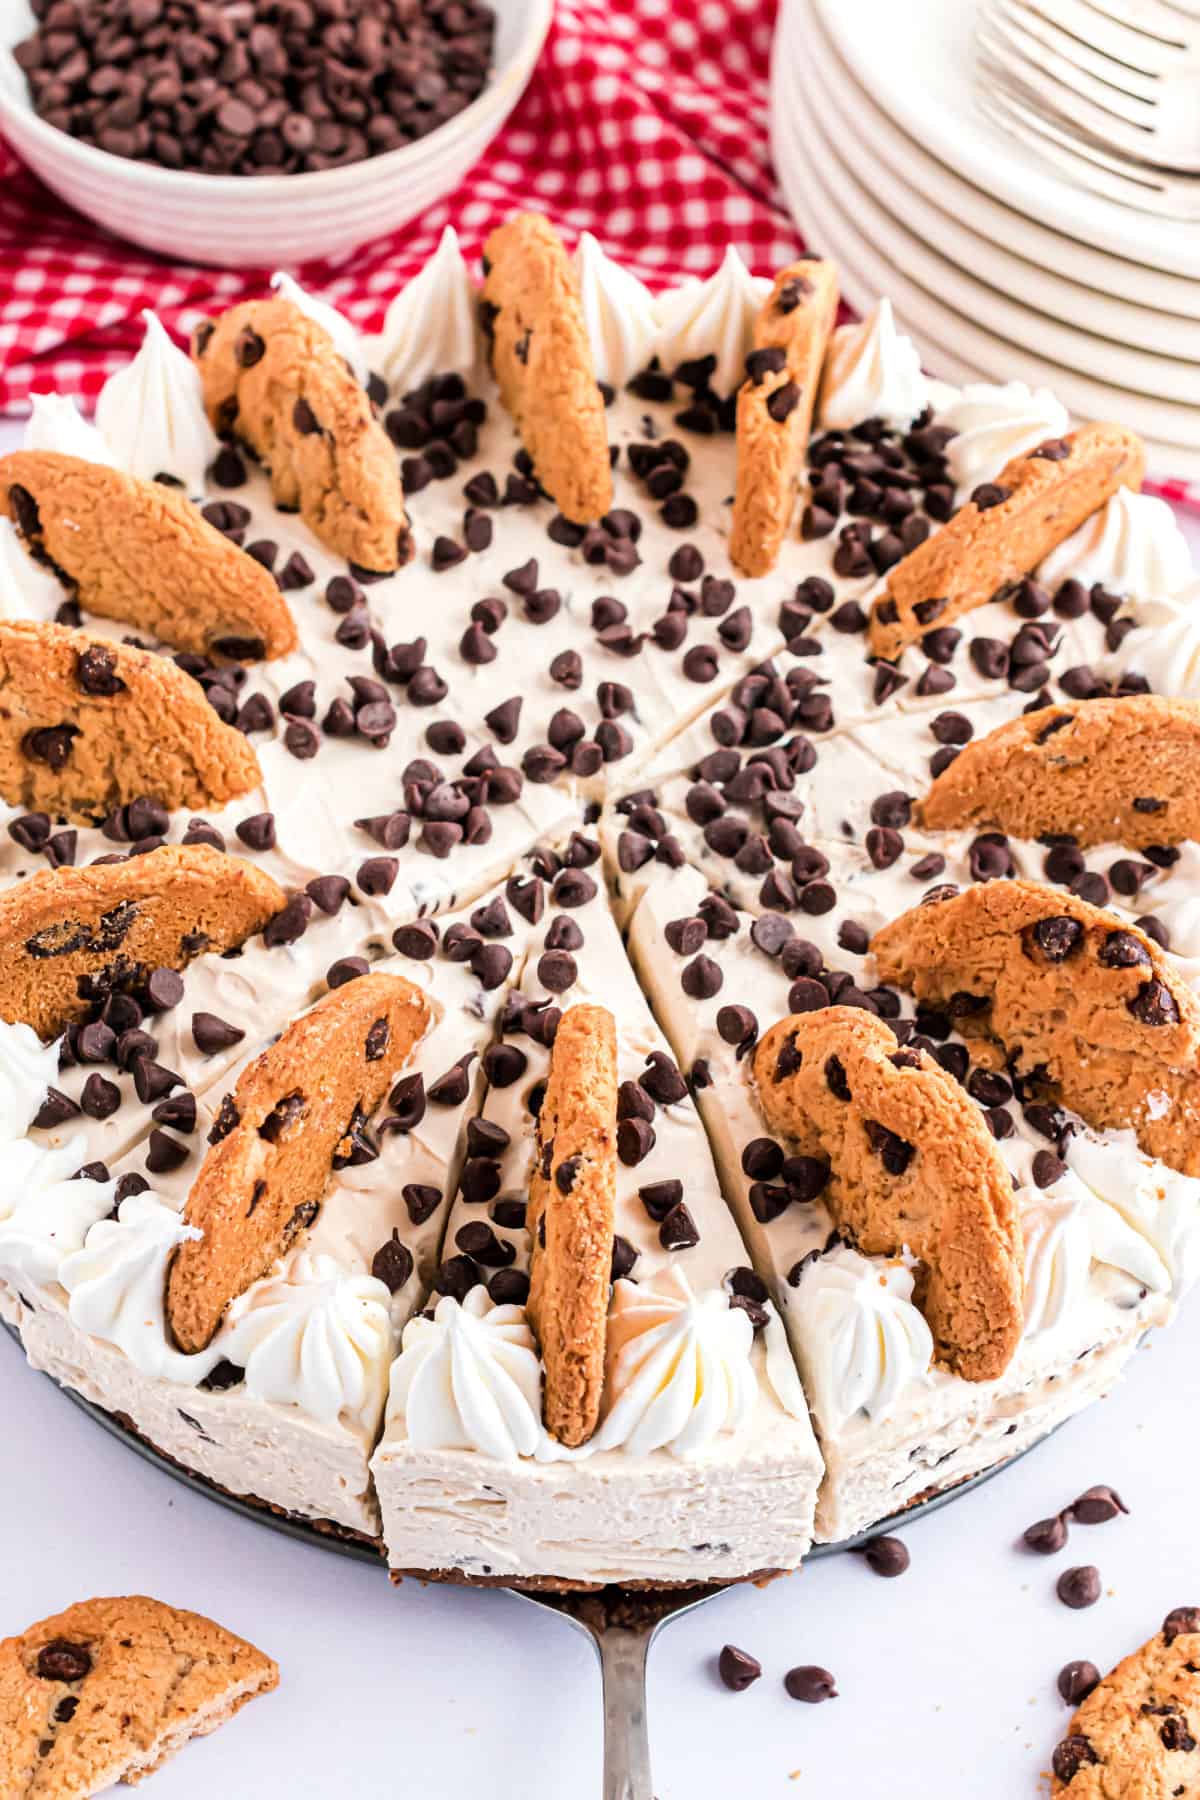 Creamy cheesecake topped with chocolate chipi cookies, chocolate chips, and whipped cream.